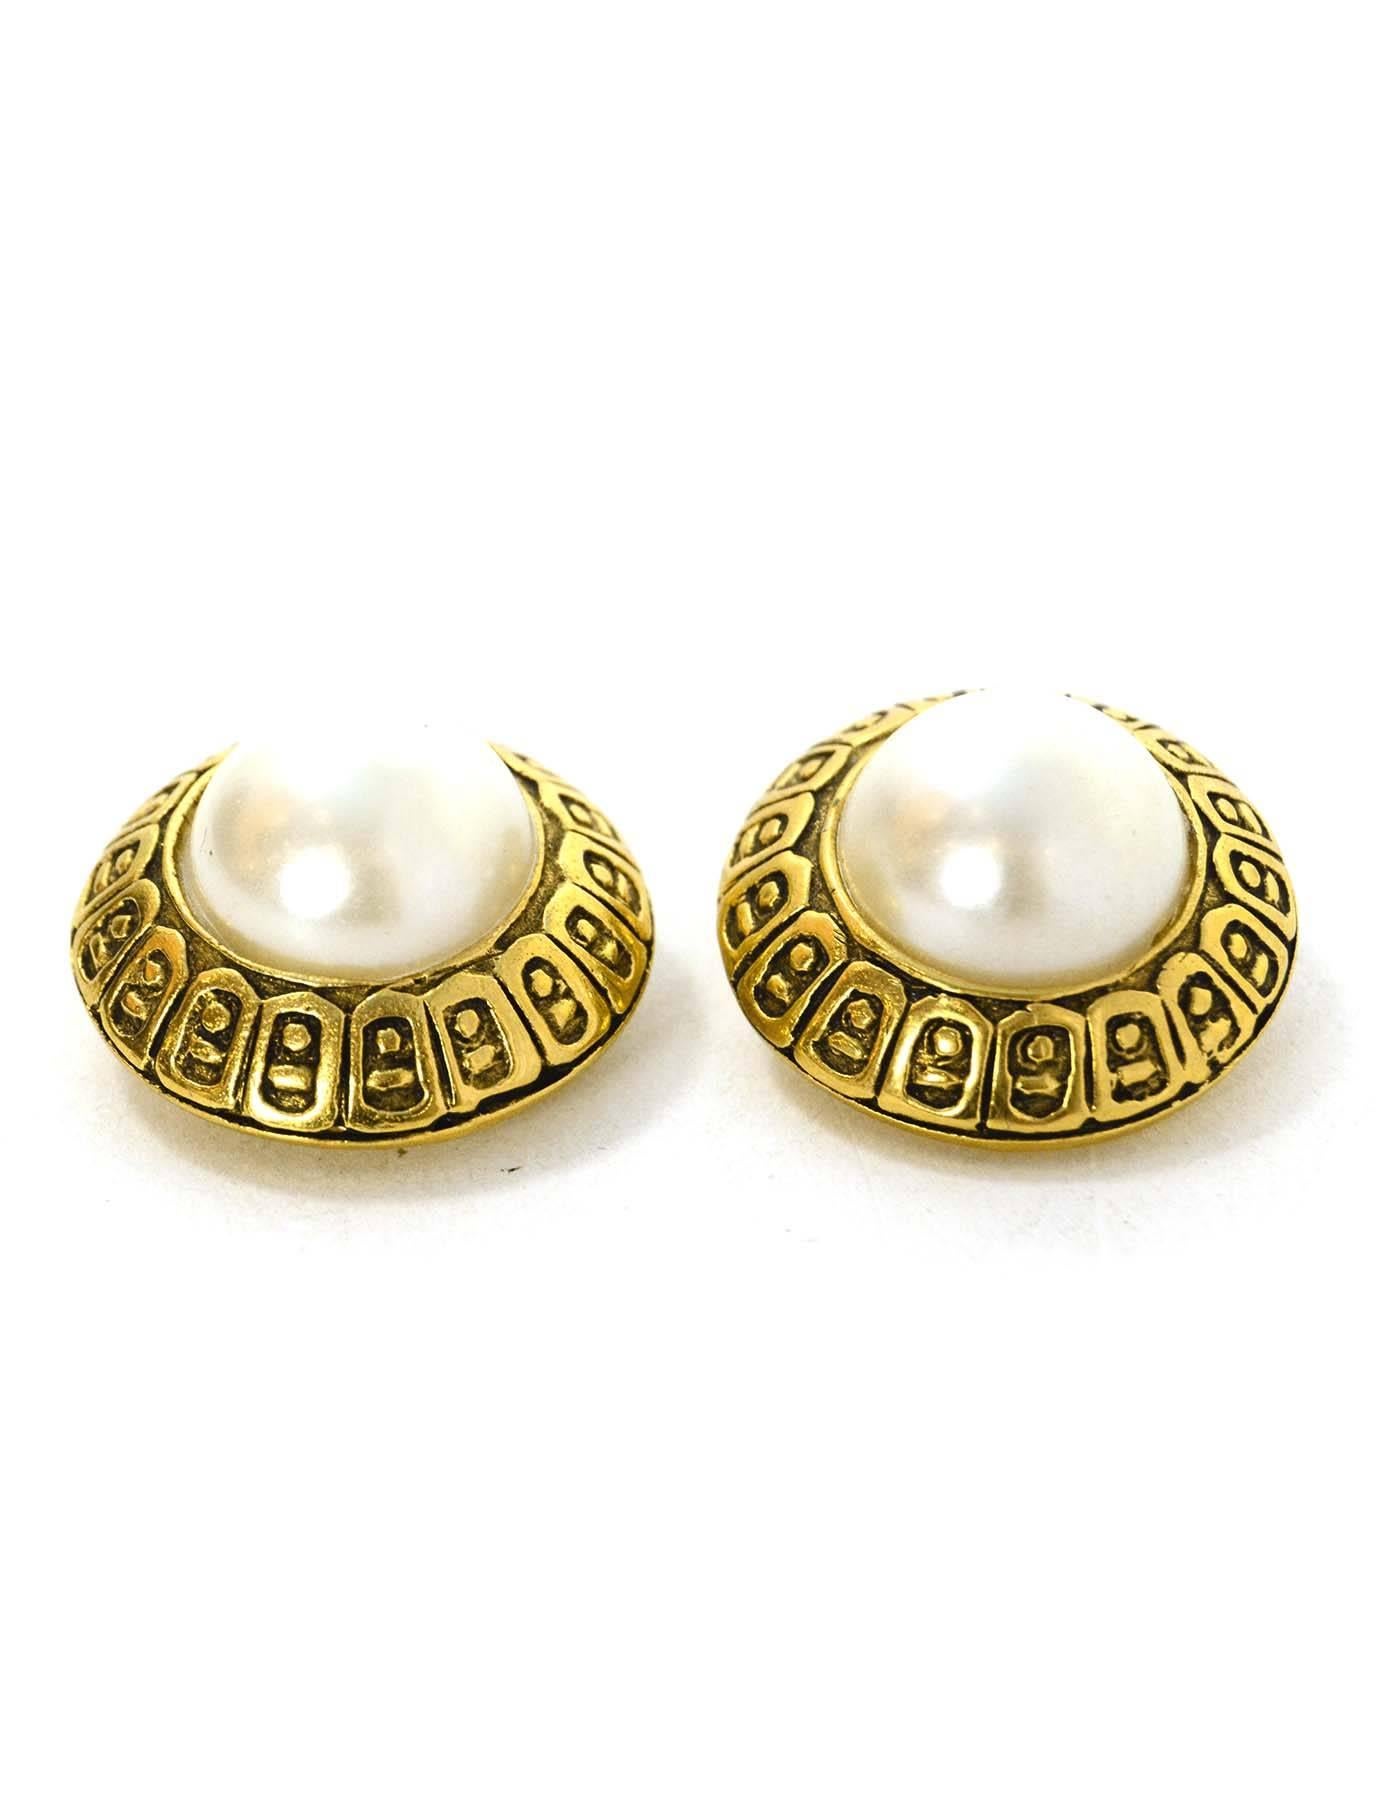 Chanel Gold & Pearl Clip On Earrings 
Features carved design in goldtone metal framing pearl
Made In: France
Year of Production: 1990-1992
Color: Goldtone and ivory
Materials: Faux pearl and metal
Closure: Clip on
Stamp: Chanel CC Made in